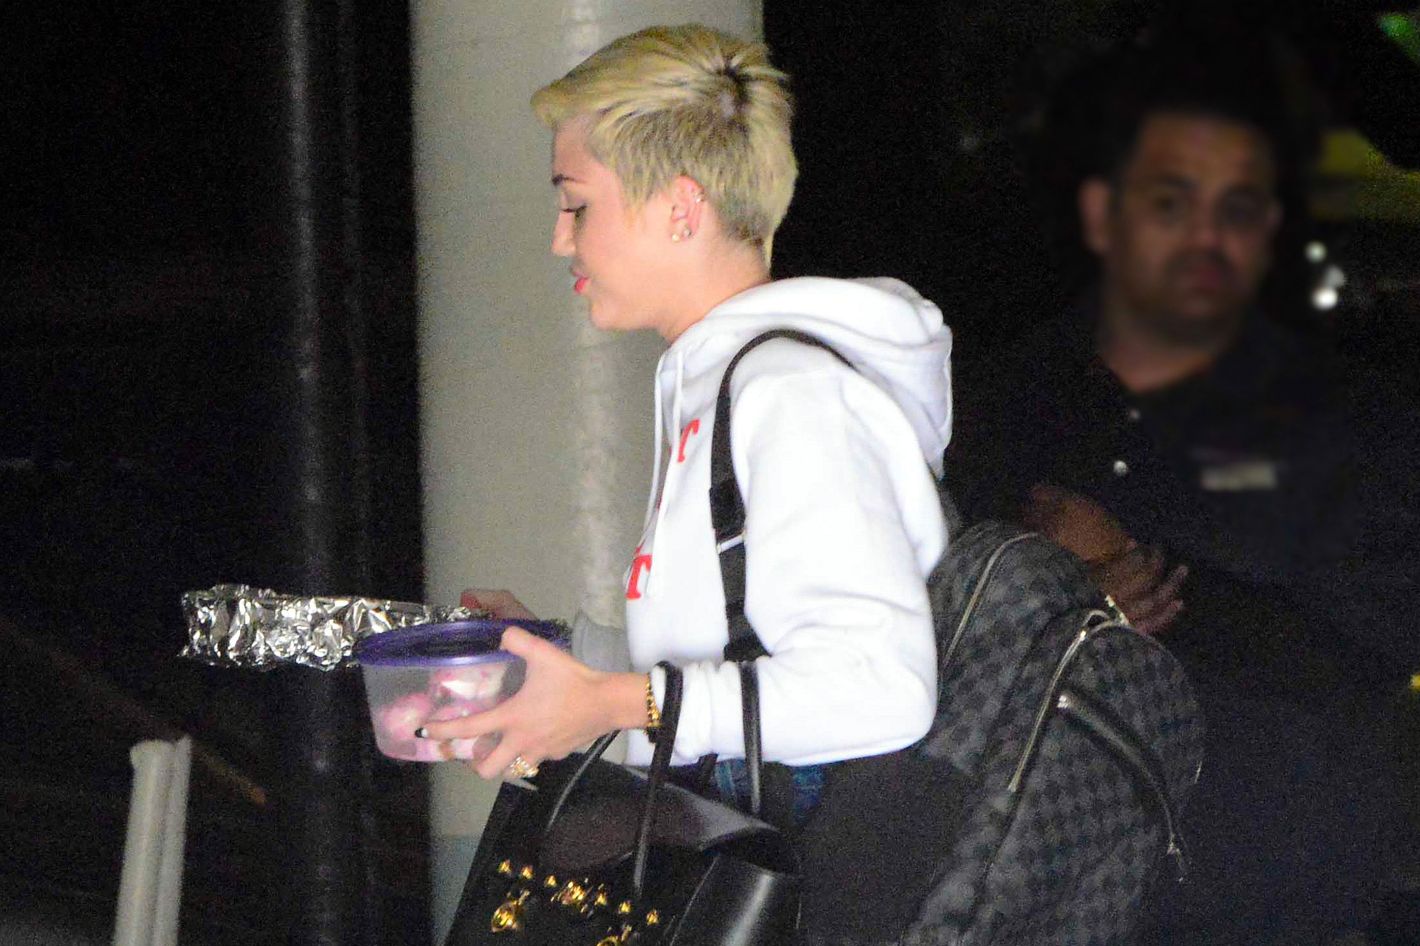 Miley Cyrus And Her Love For Luis Vuitton Handbags